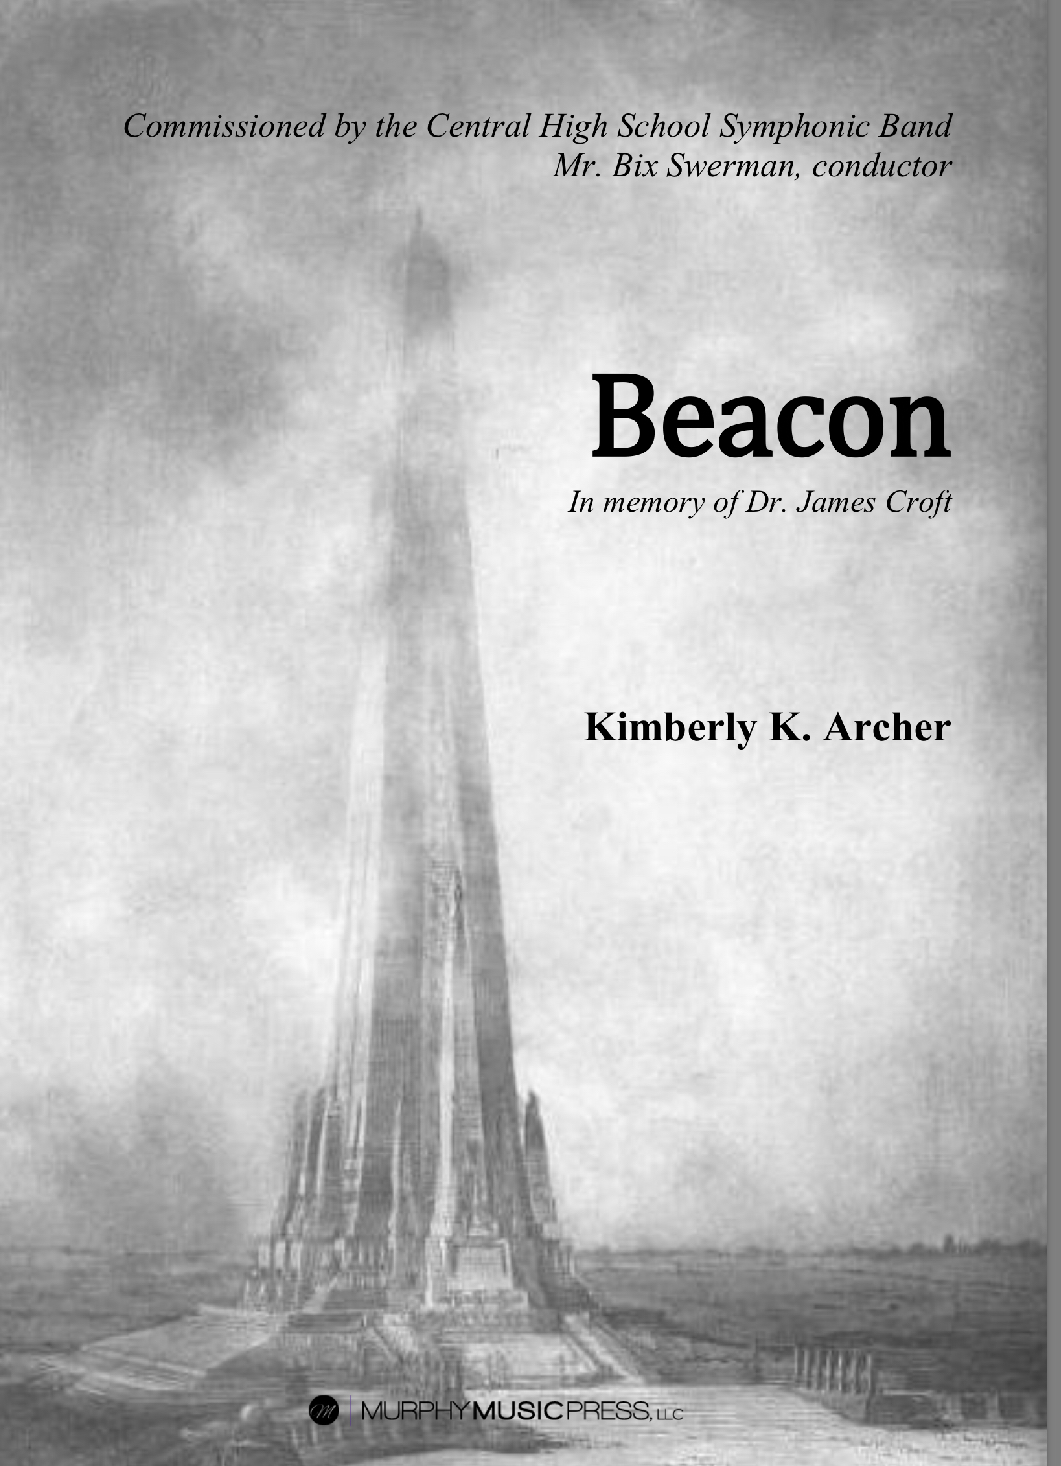 Beacon by Kimberly Archer